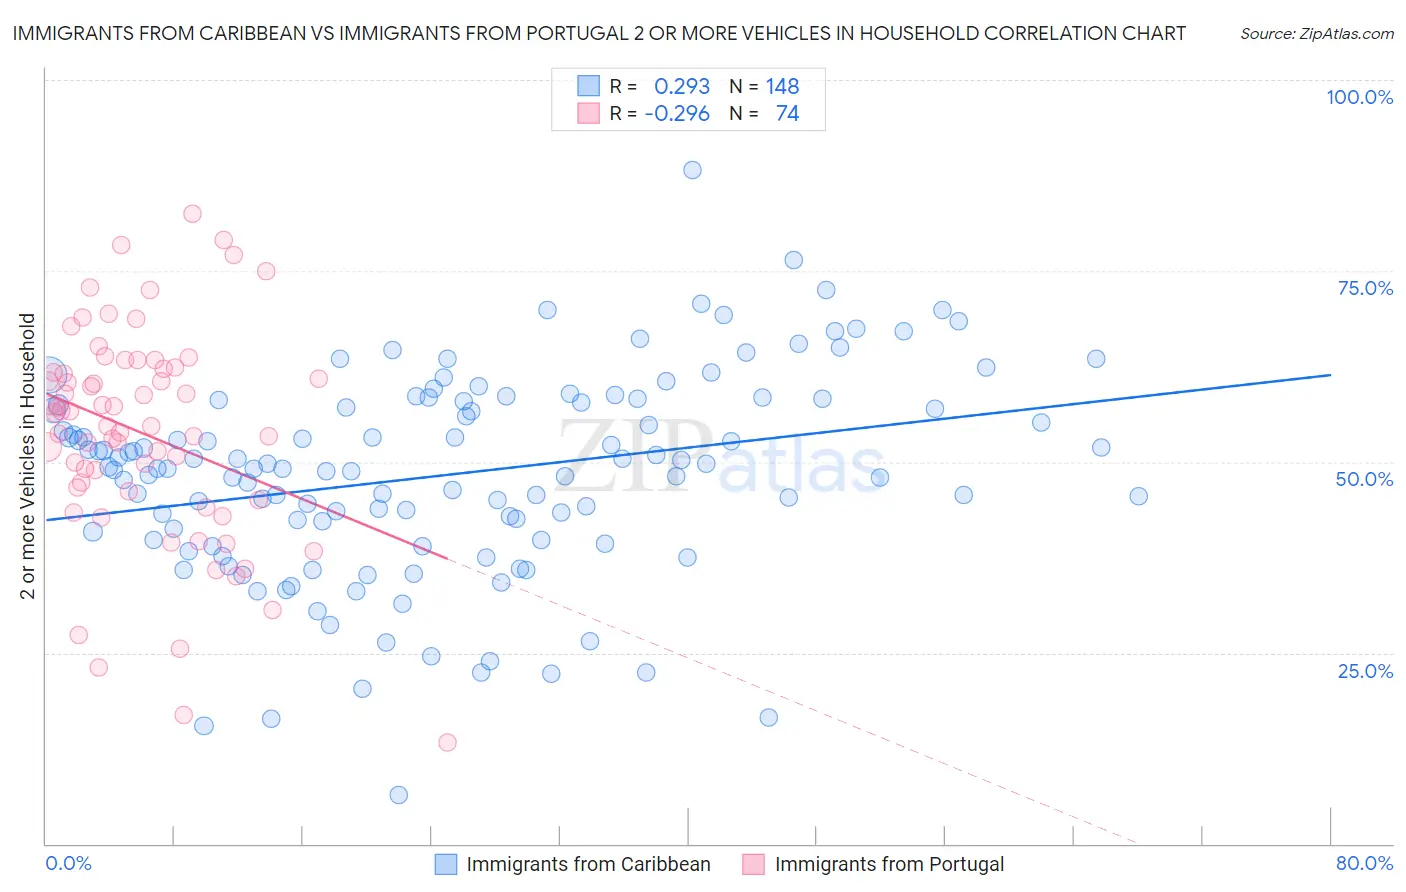 Immigrants from Caribbean vs Immigrants from Portugal 2 or more Vehicles in Household